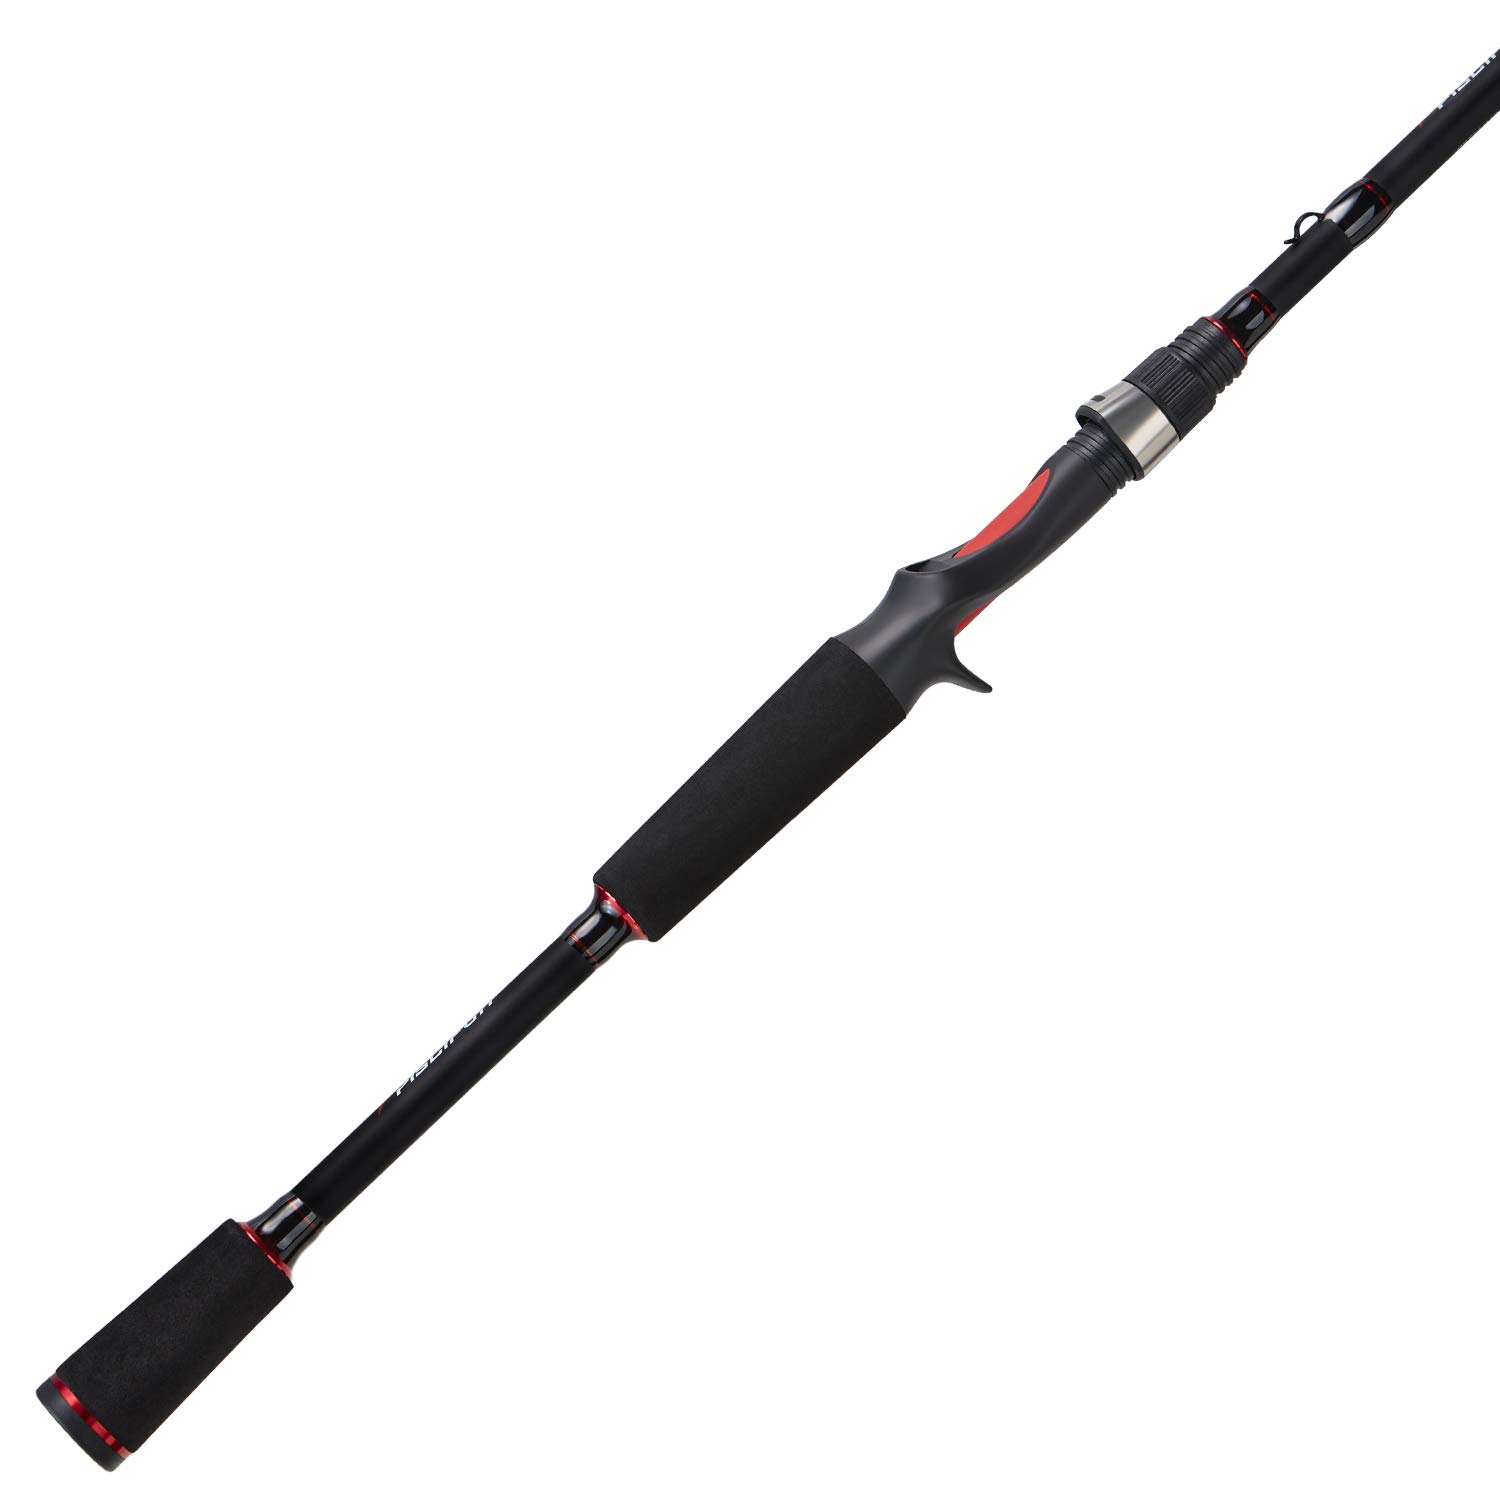 Piscifun Torrent Baitcasting Rod Review - Tackle Test